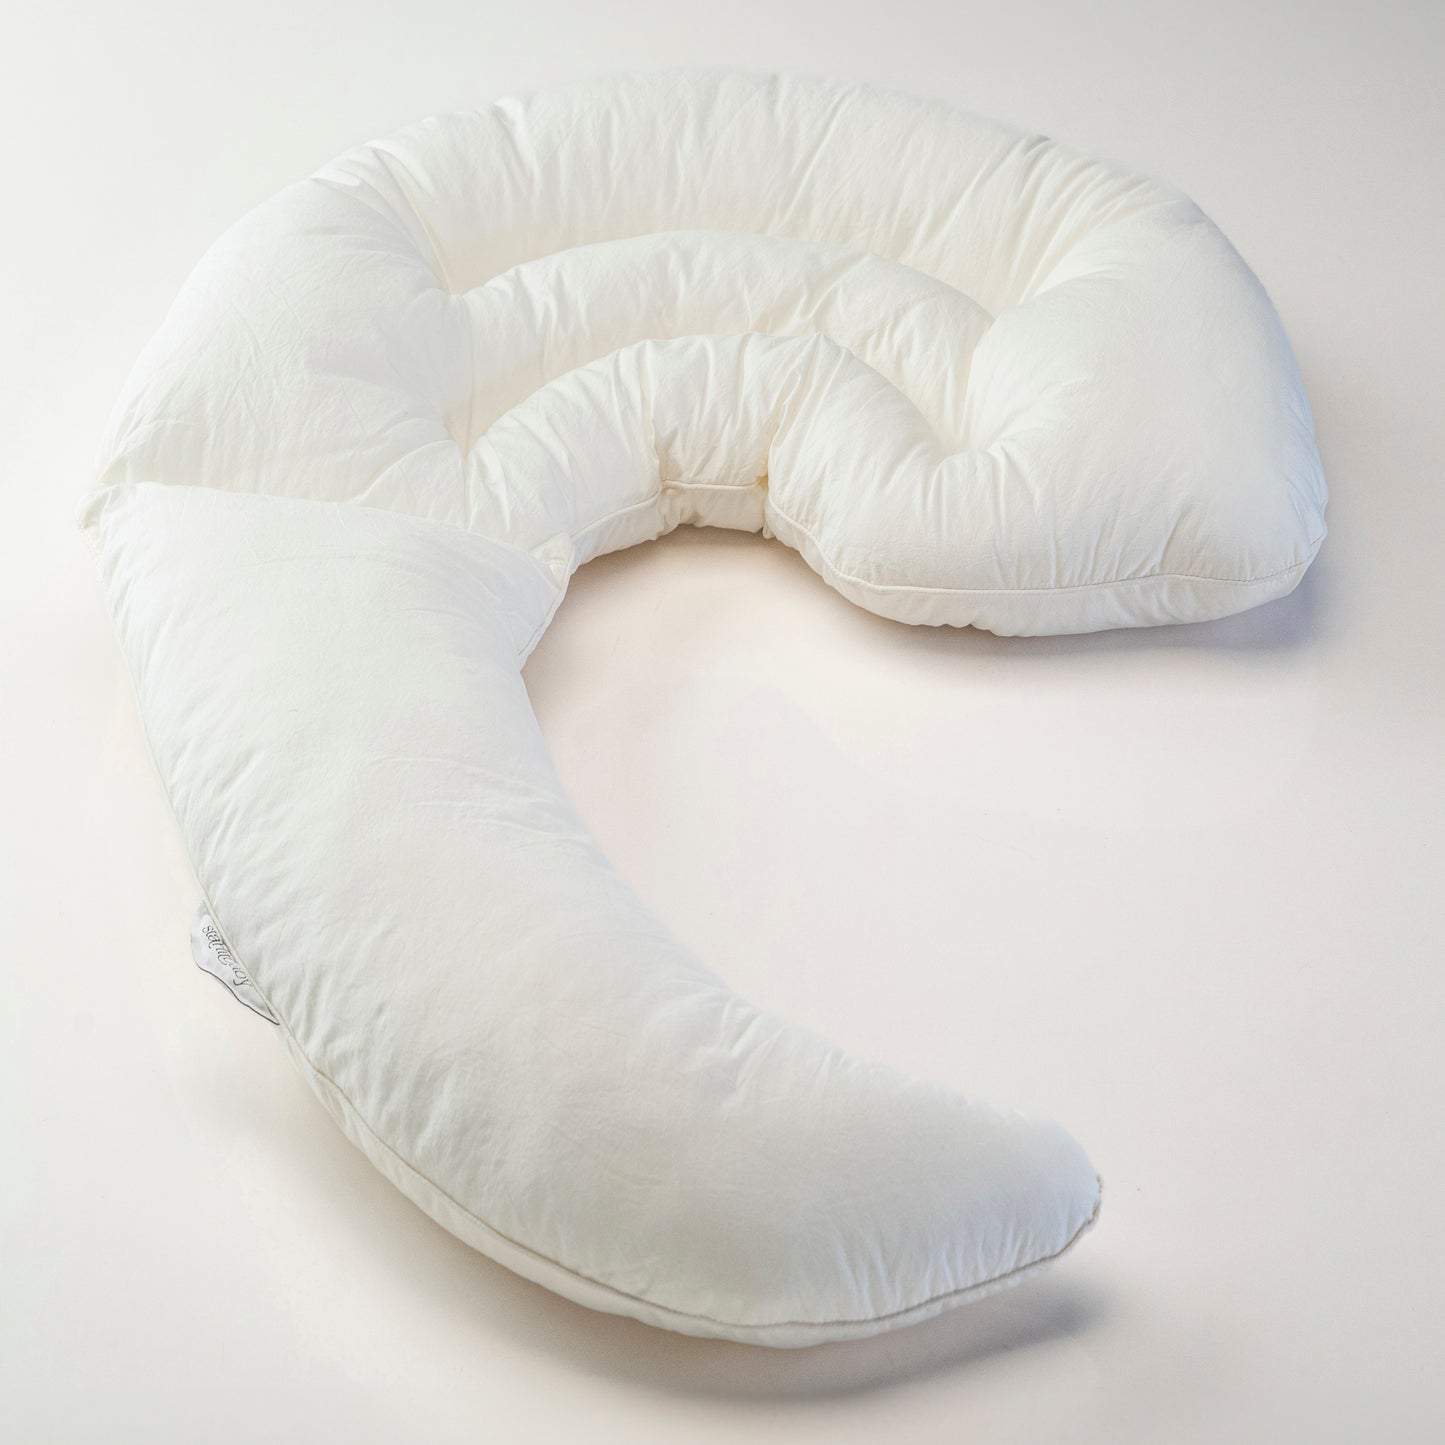 LACTANCE CUSHIONIdeal for moms with cesarean section!